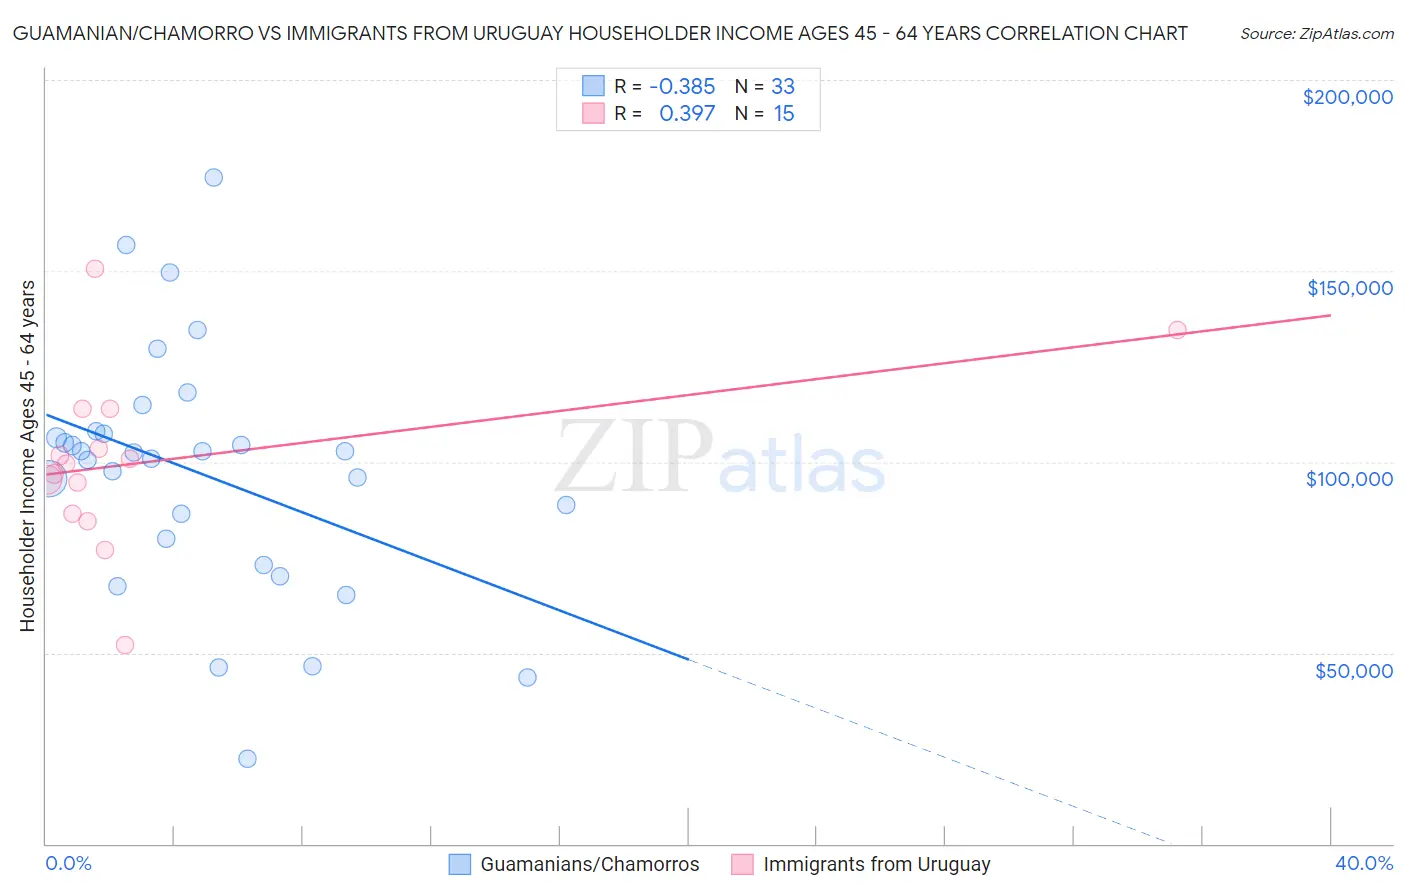 Guamanian/Chamorro vs Immigrants from Uruguay Householder Income Ages 45 - 64 years